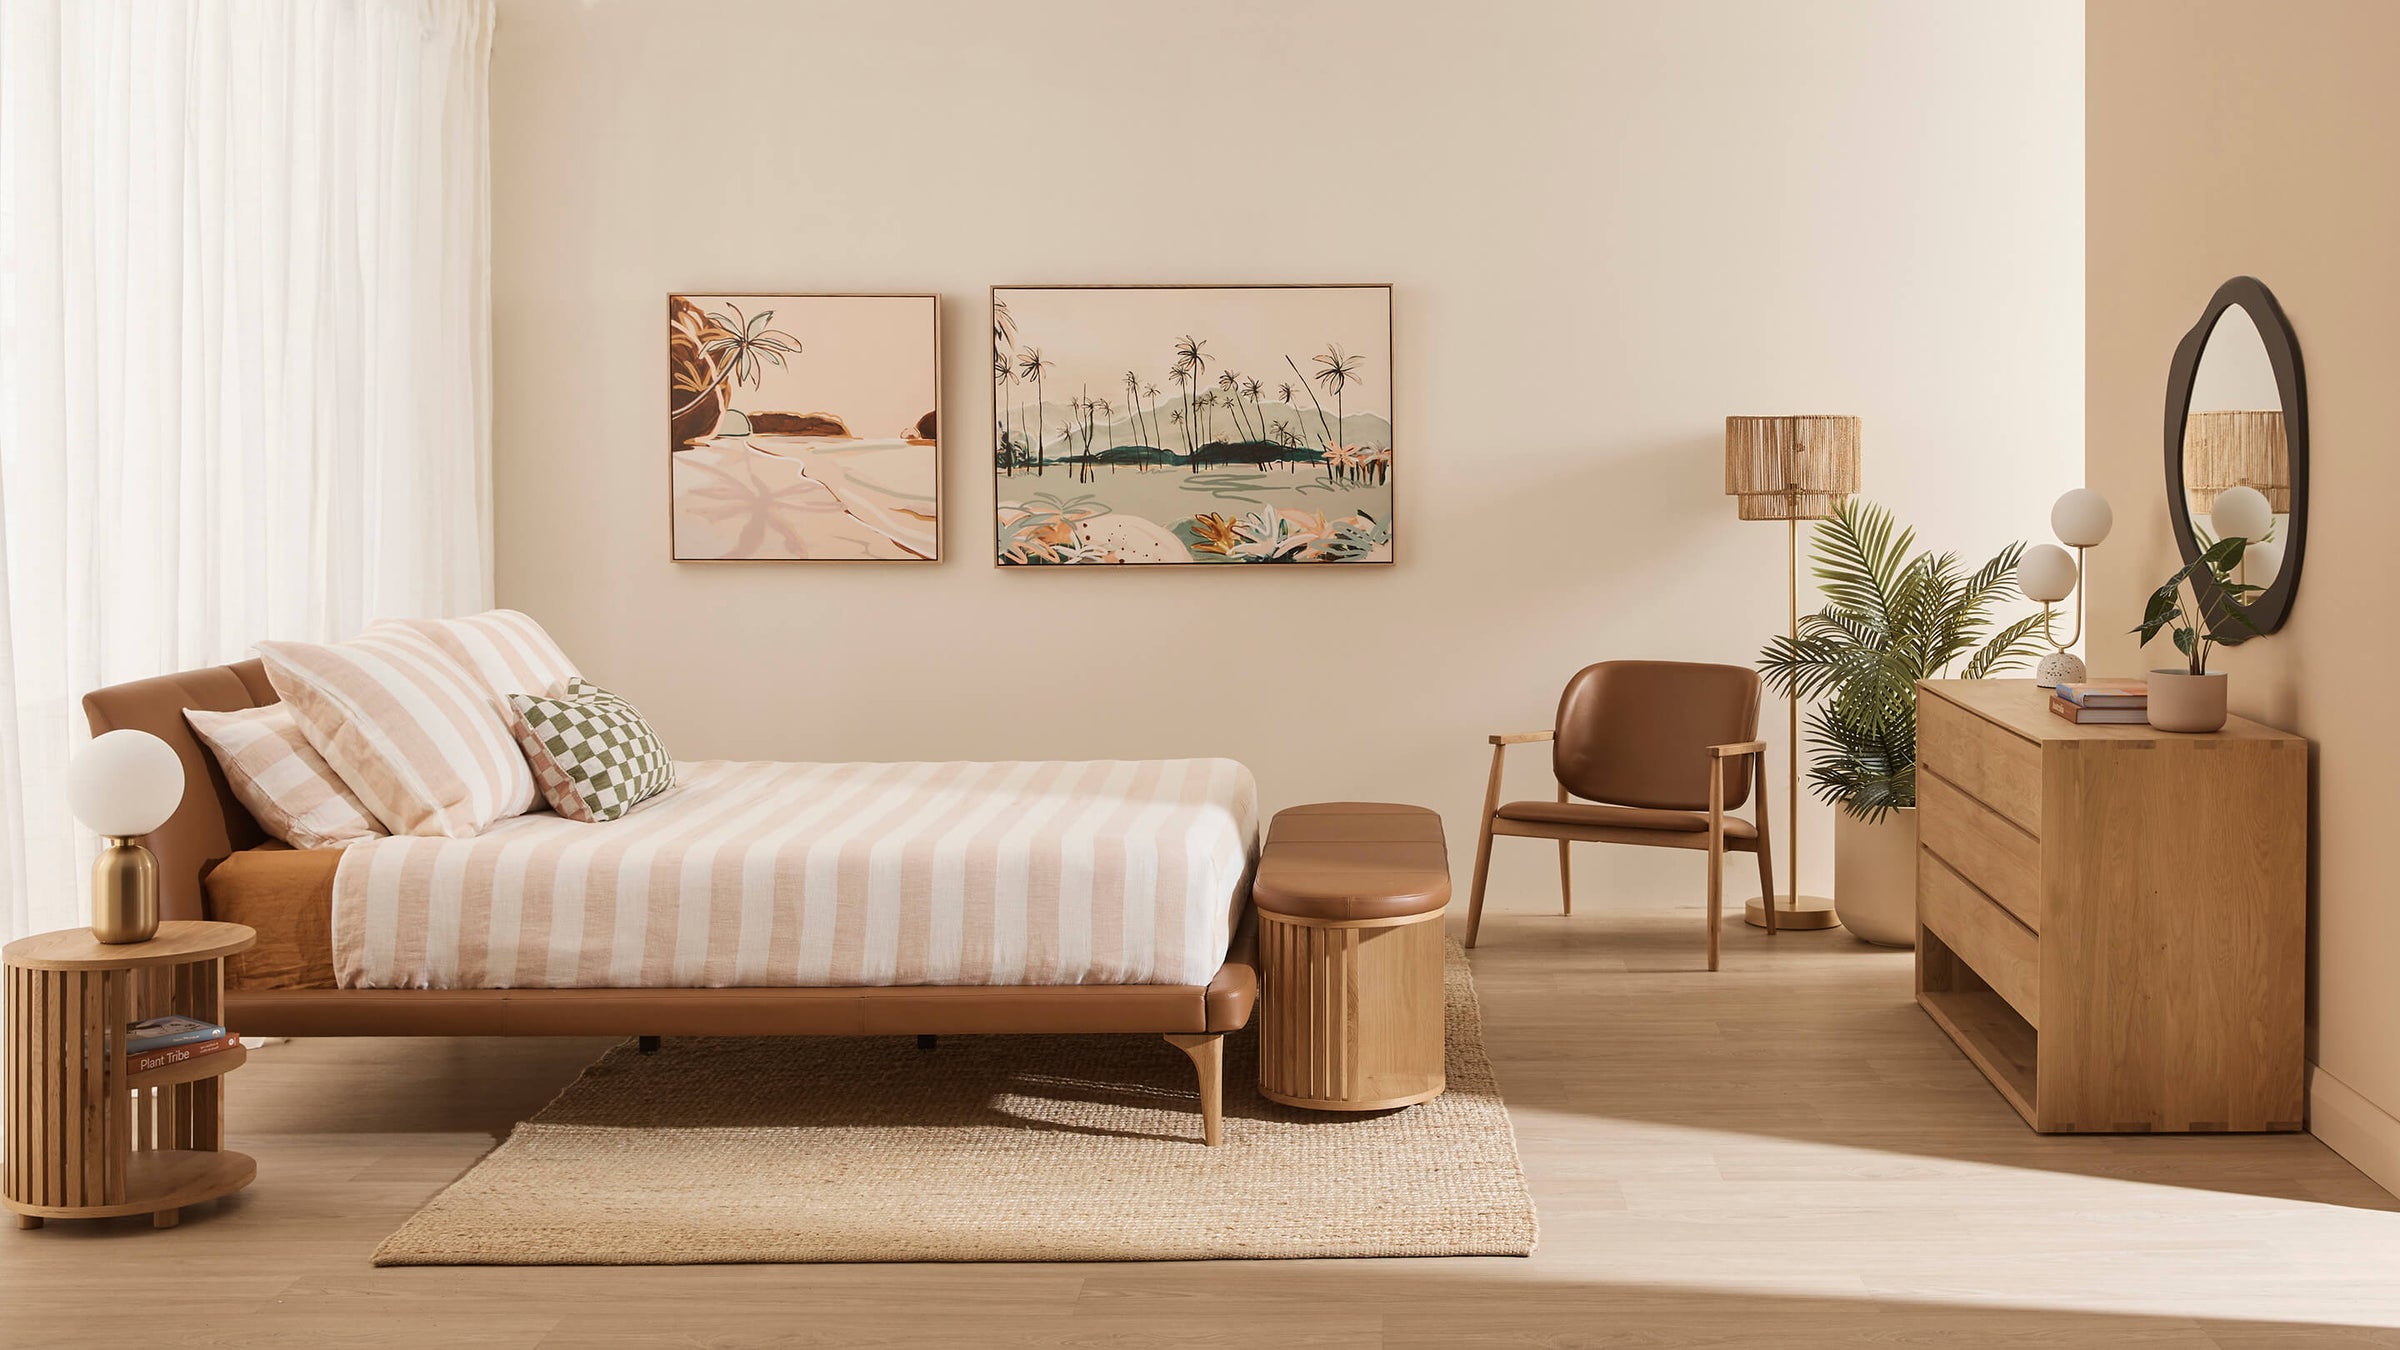 Introducing our Abode Spring Summer 22 collection, full of neutral yet fun living, dining, home office, and bedroom spaces. Shop the collection online or in-store now!